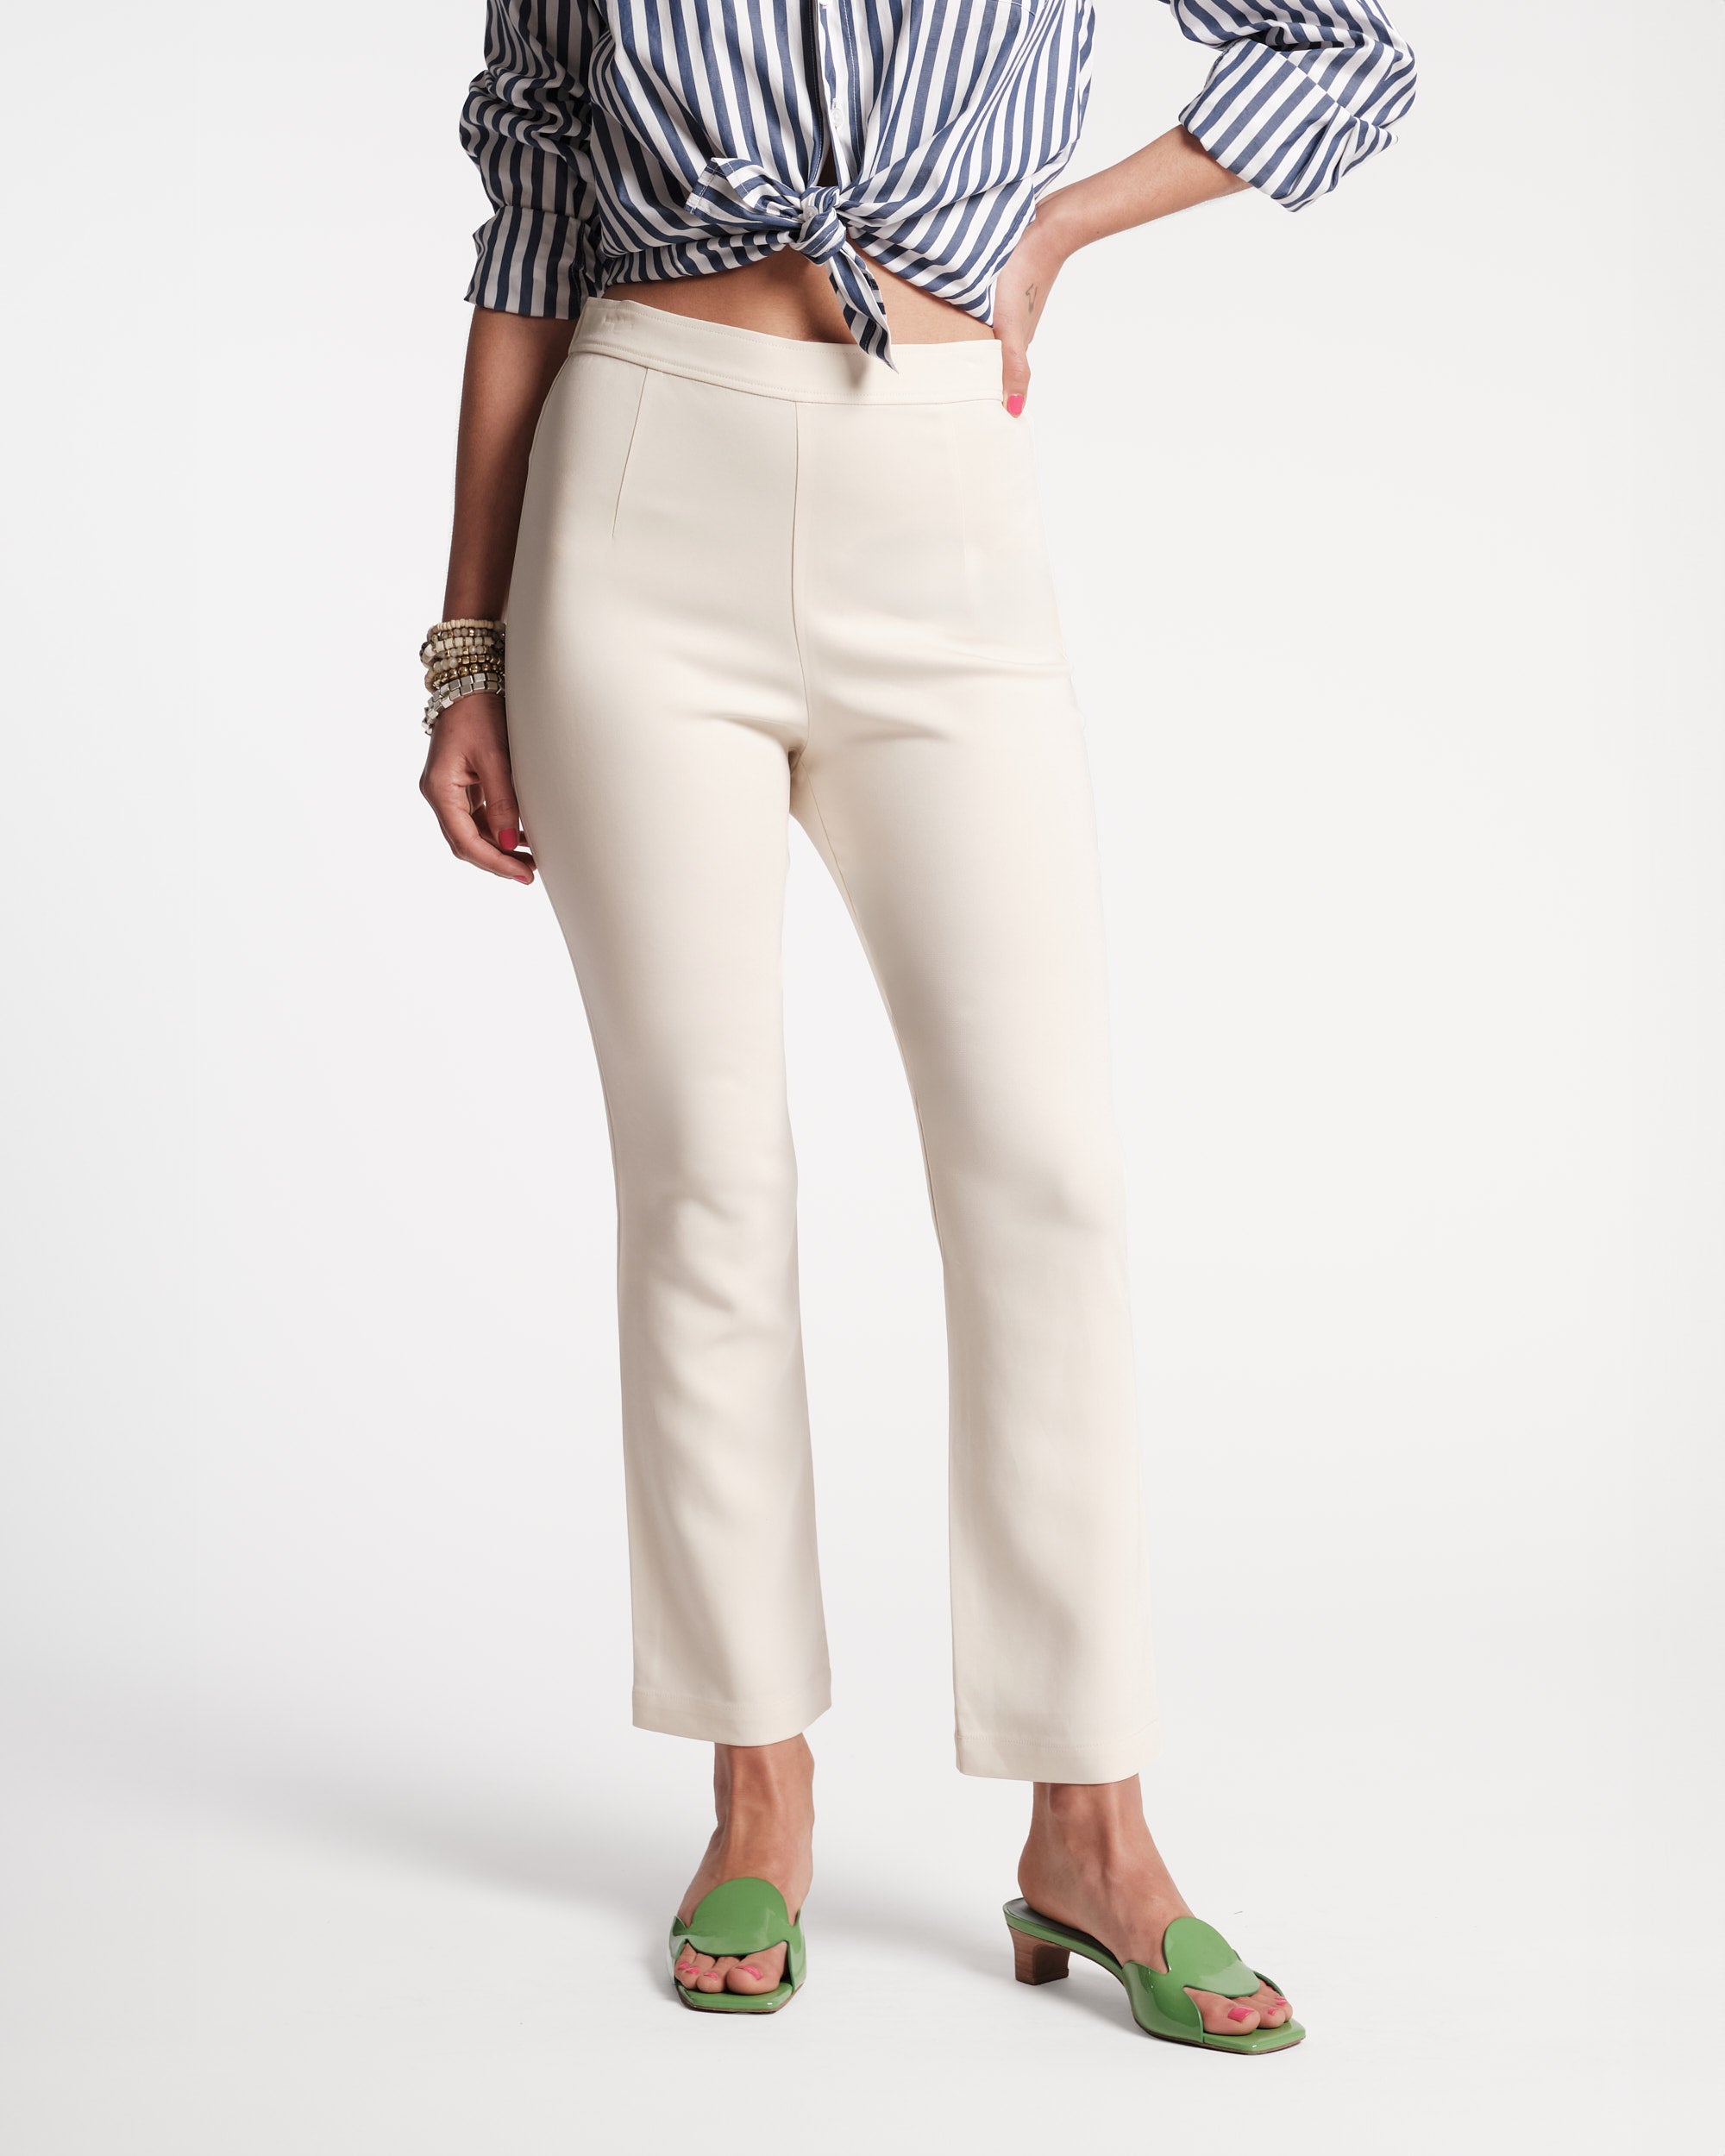 Quincy Stretch Pant